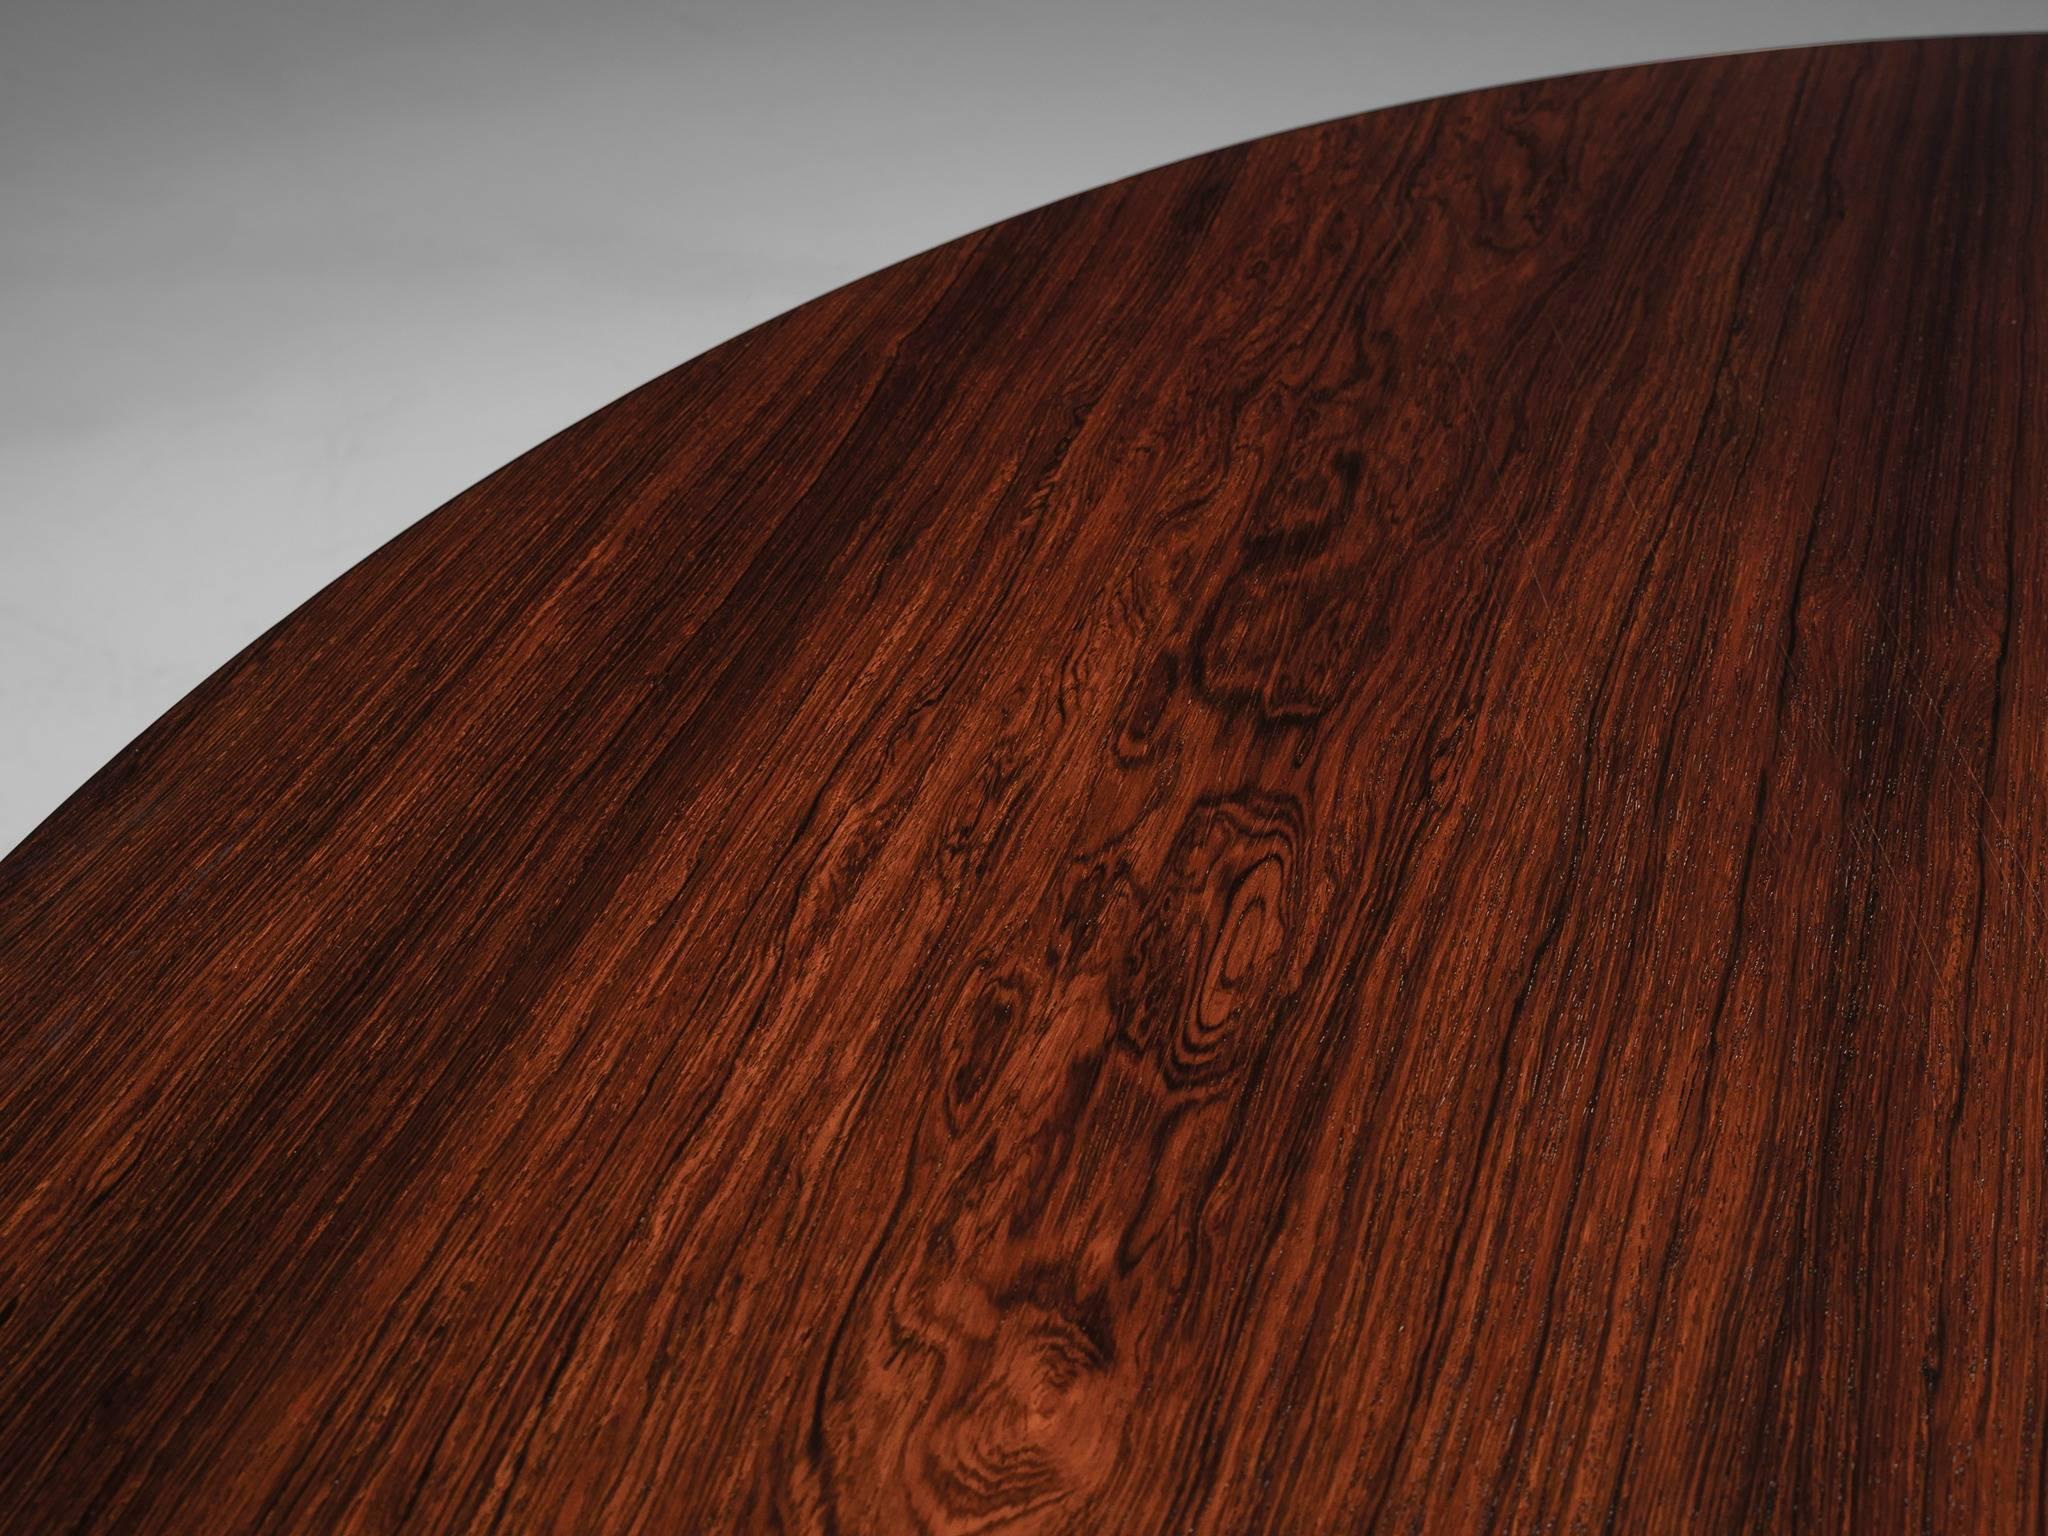 Unique Rosewood Table by Danish Master Cabinet Maker 1